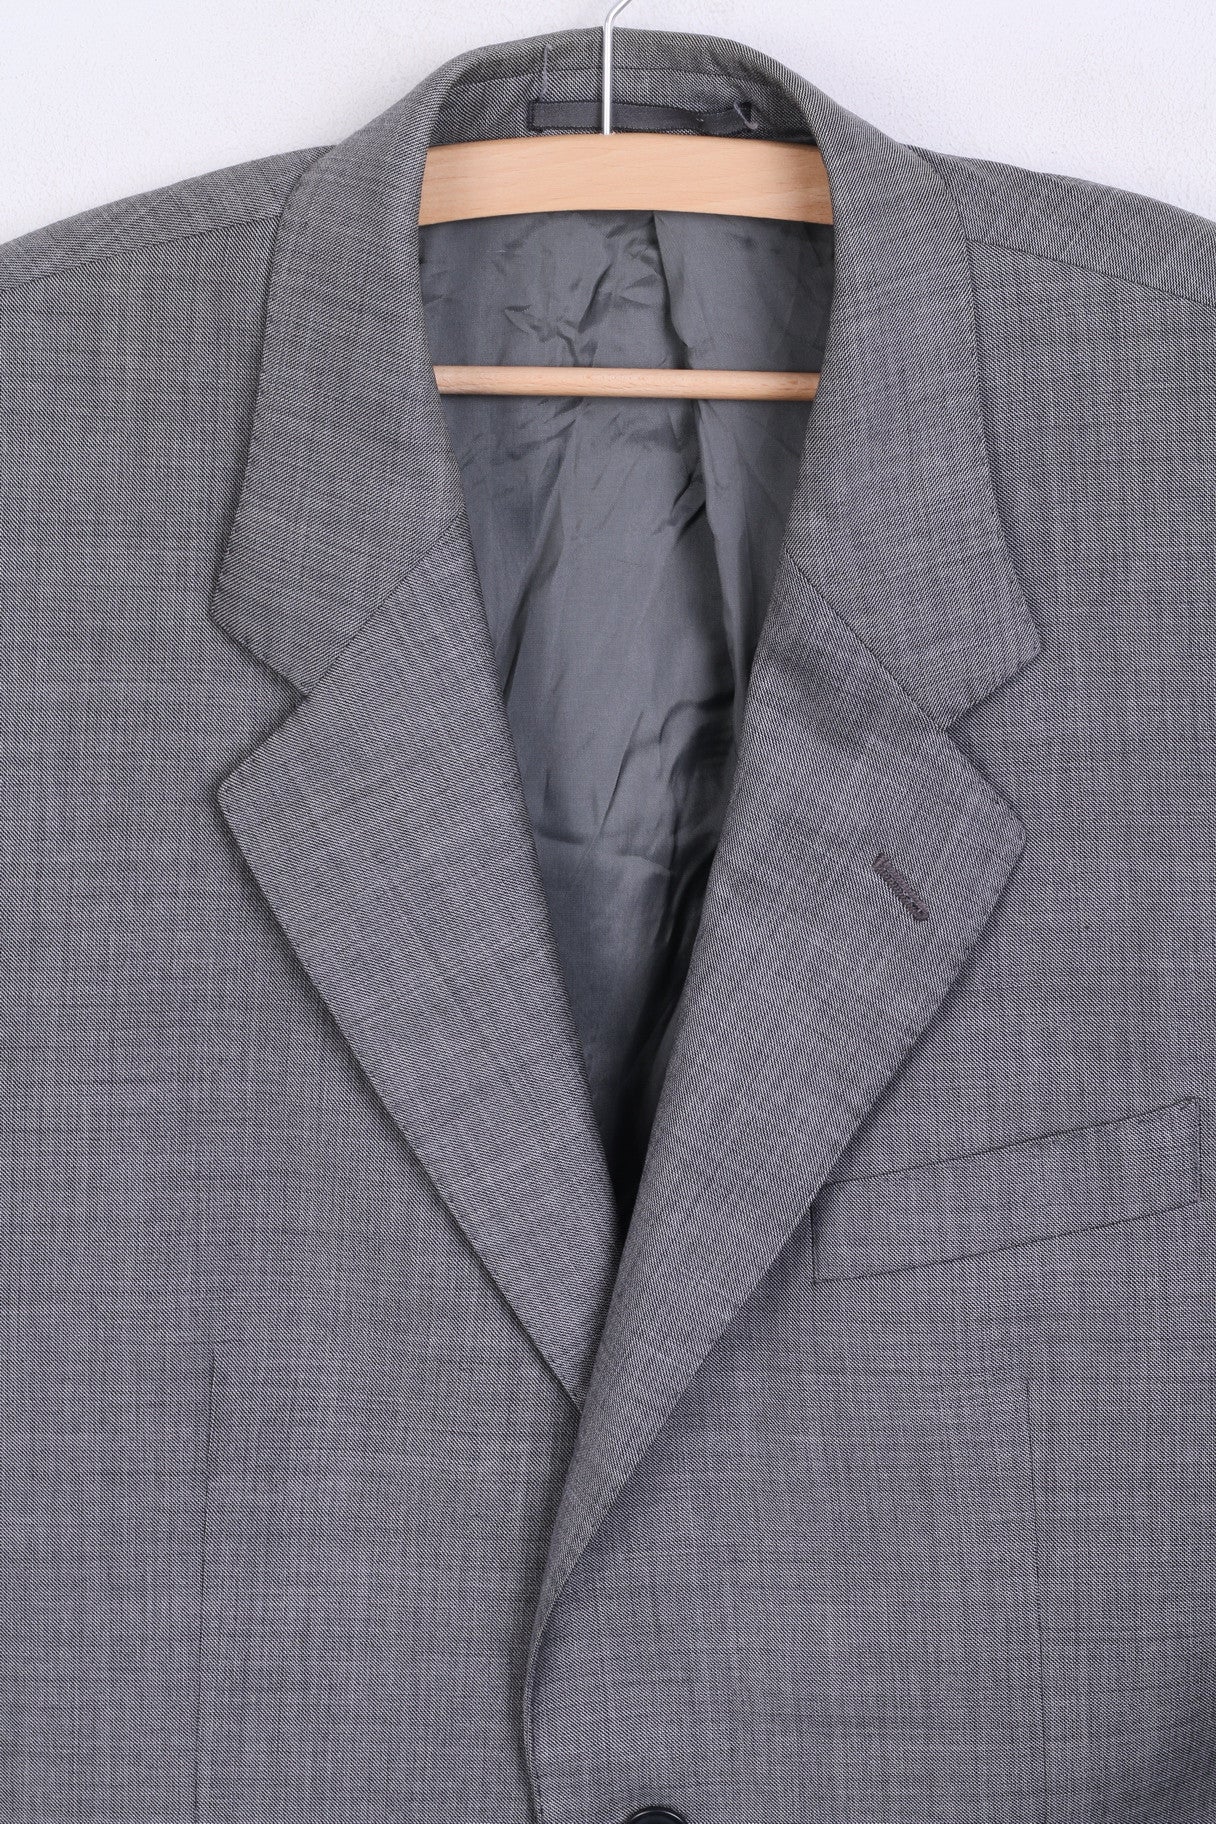 T.M. Lewin Mens 41M Blazer Suit Top Gray Jacket Tailoring Wool Single Breasted